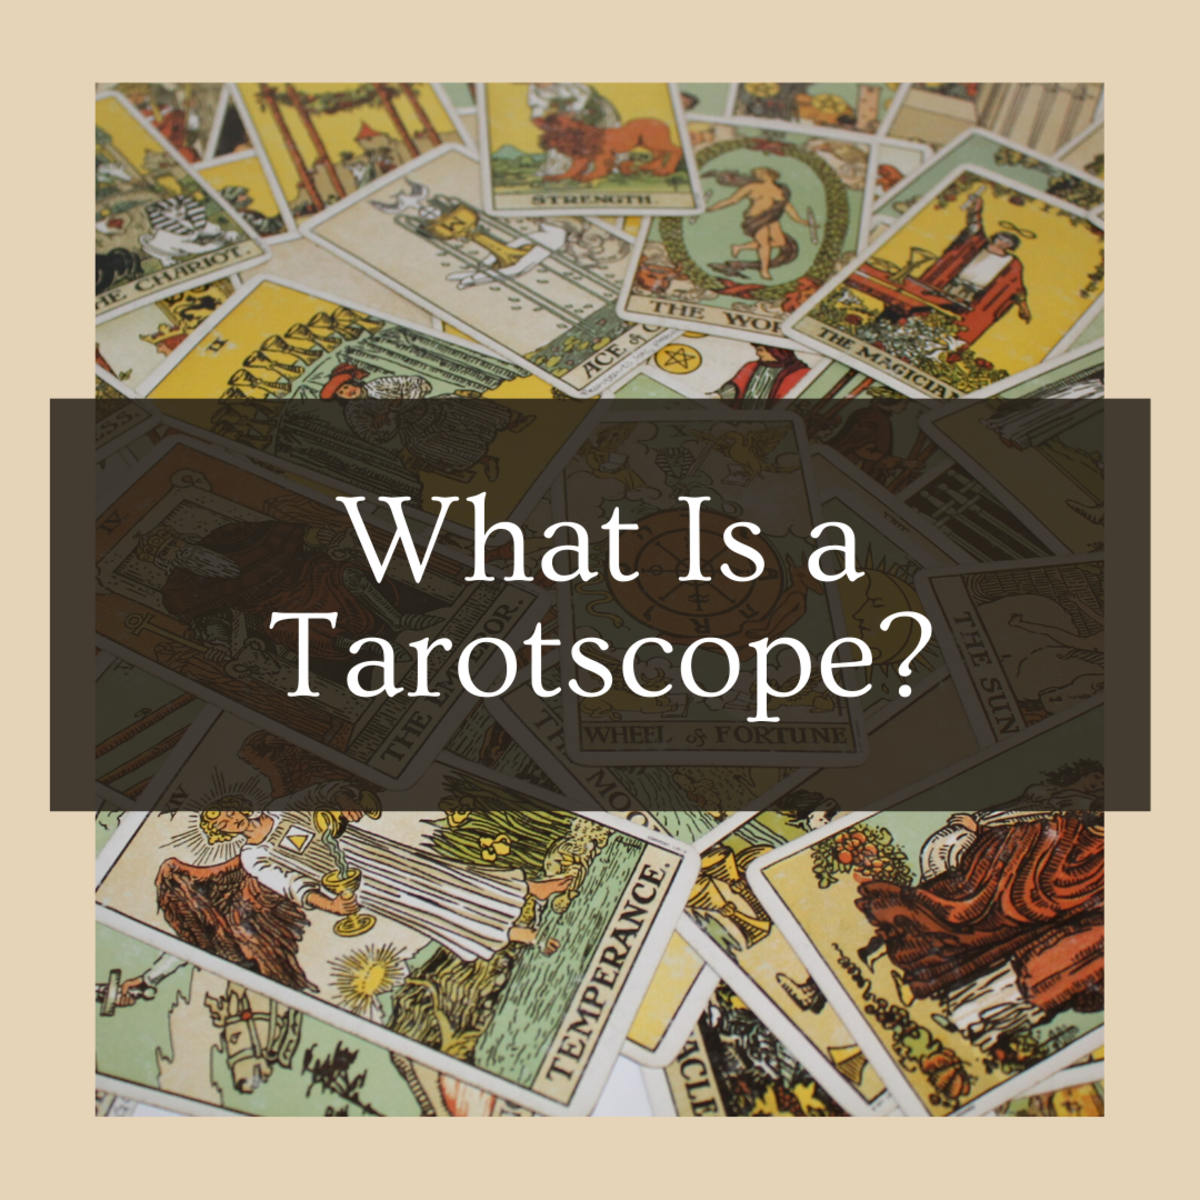 Read on to learn all about tarotscopes! 